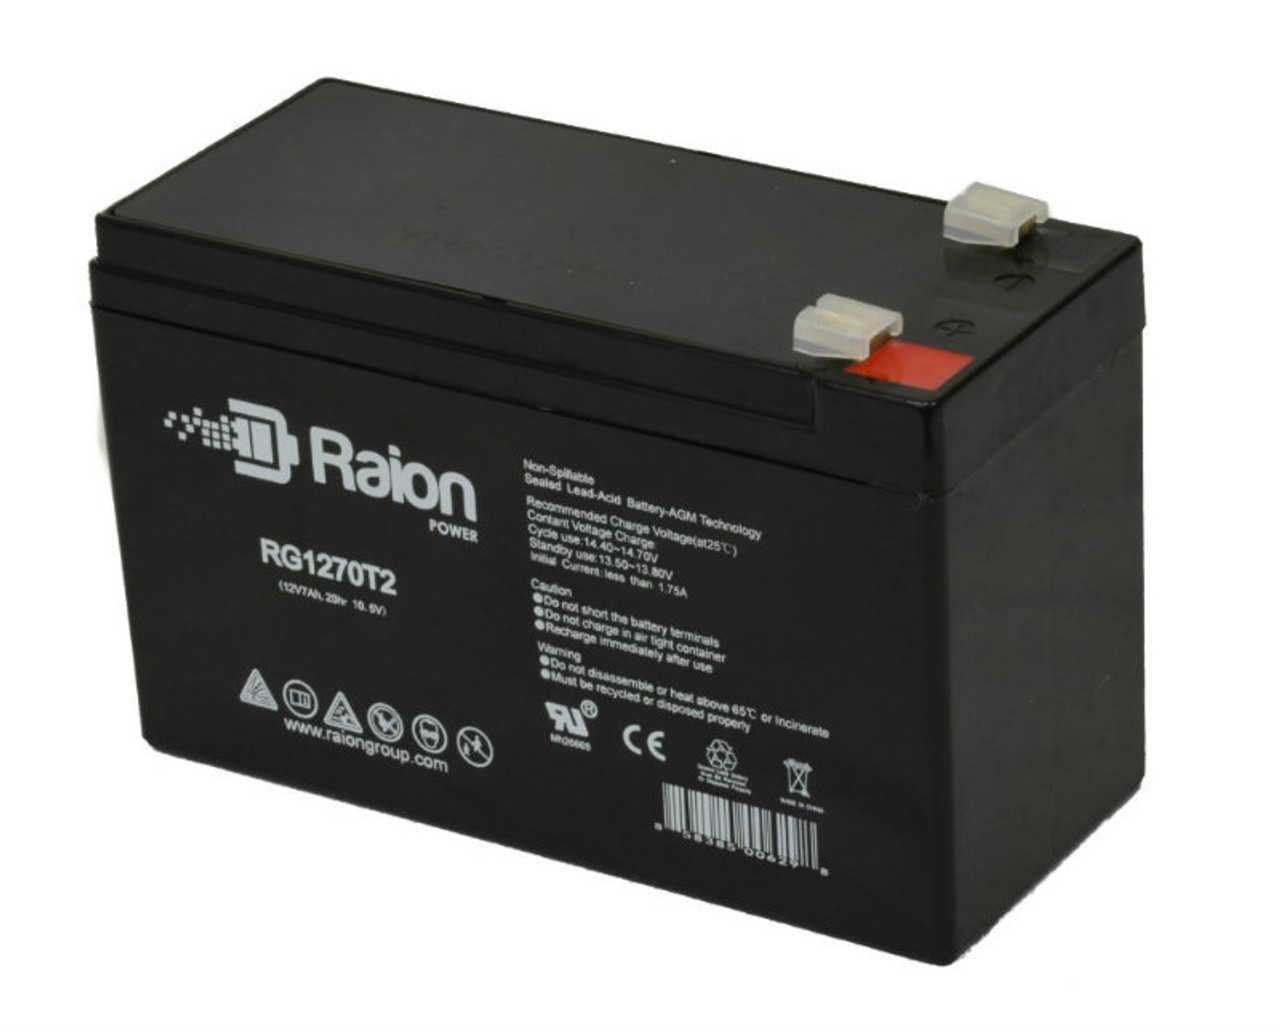 Raion Power RG1270T1 12V 7Ah Non-Spillable Replacement Battery for Johnson Controls GC1245